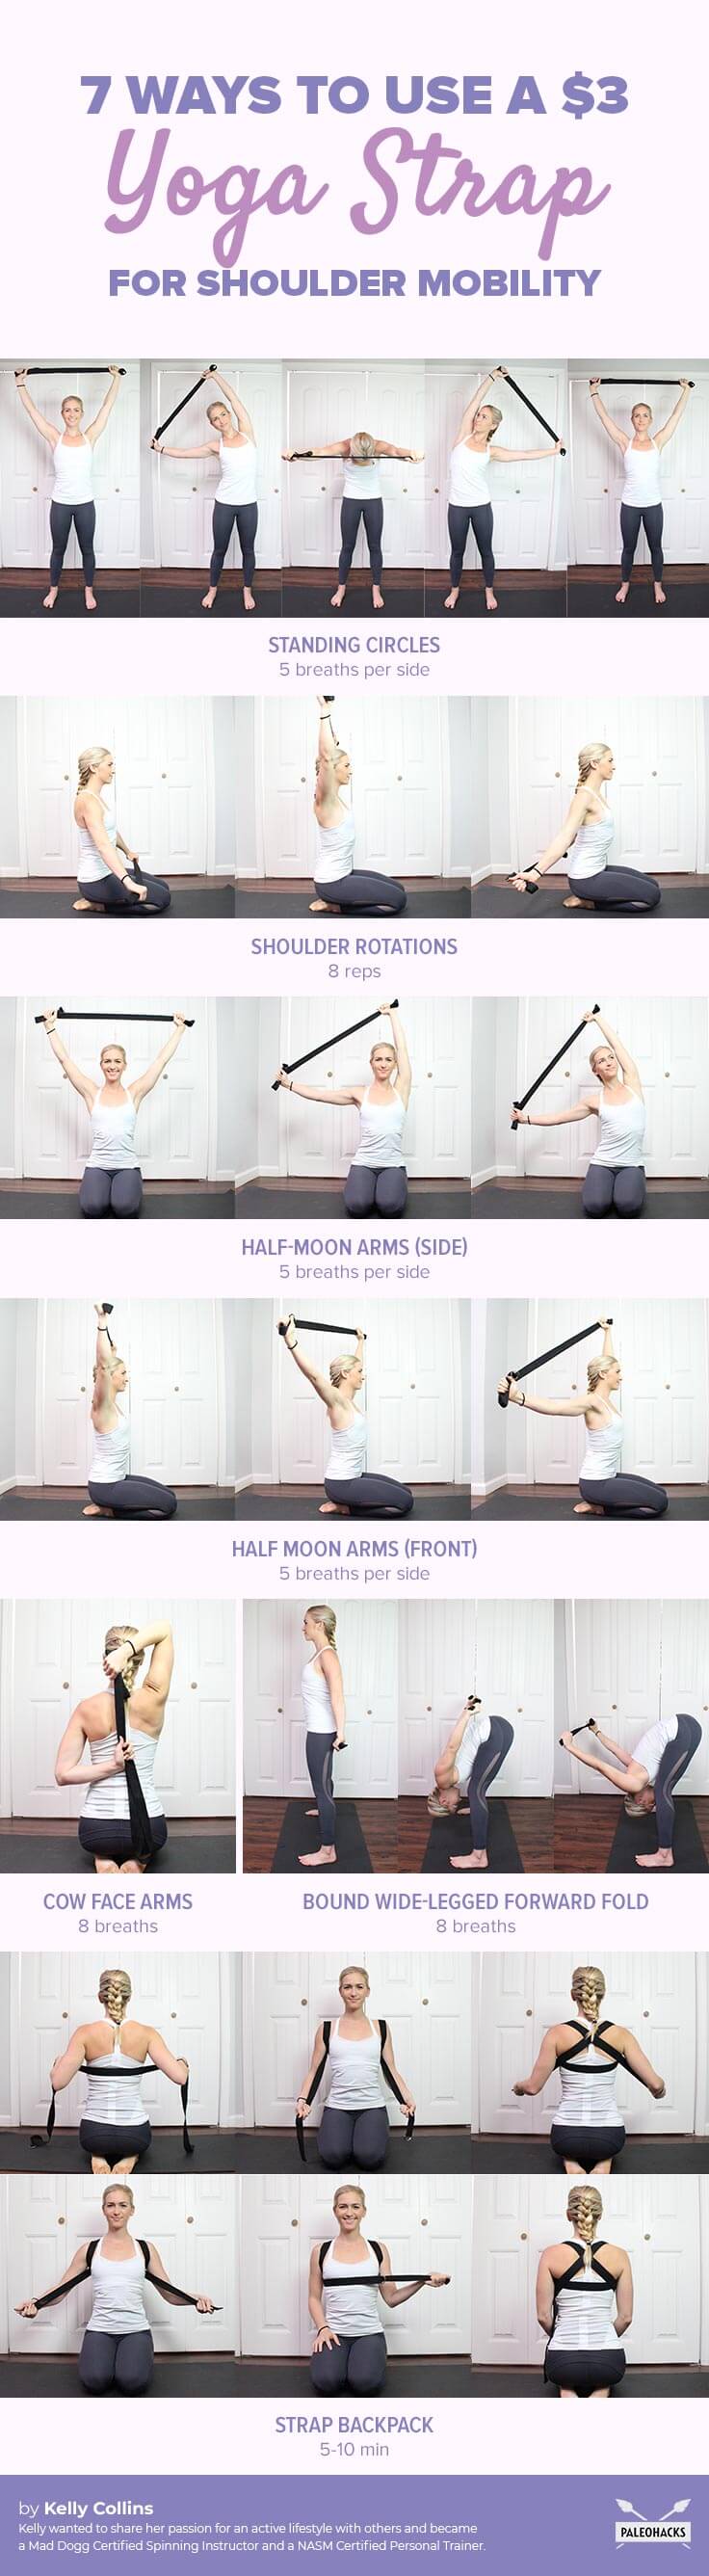 Use a $3 yoga strap to regain mobility in your shoulders with these seven easy stretches. Improve your posture with these yoga strap stretches.